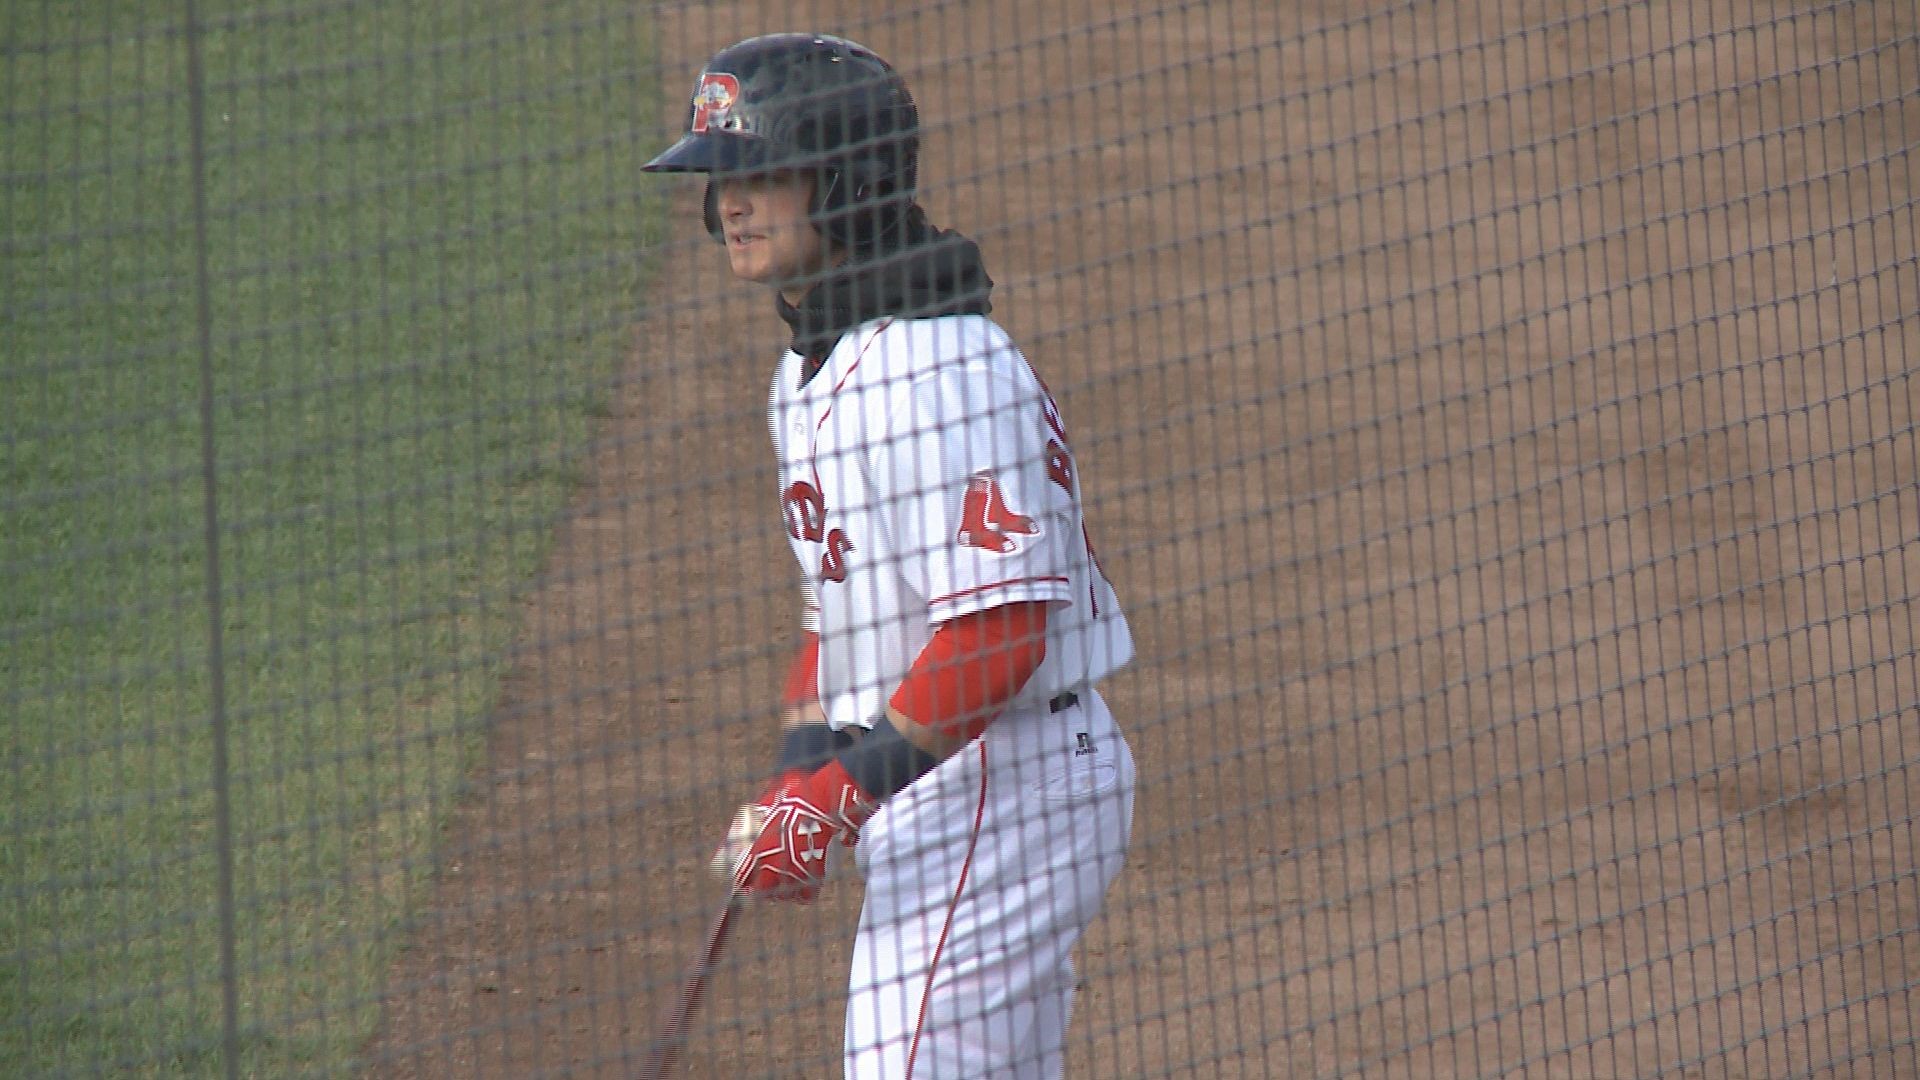 His success at the plate in the 2016 season with the Portland Sea Dogs earned Andrew Benintendi a call-up to the Boston Red Sox by year's end.